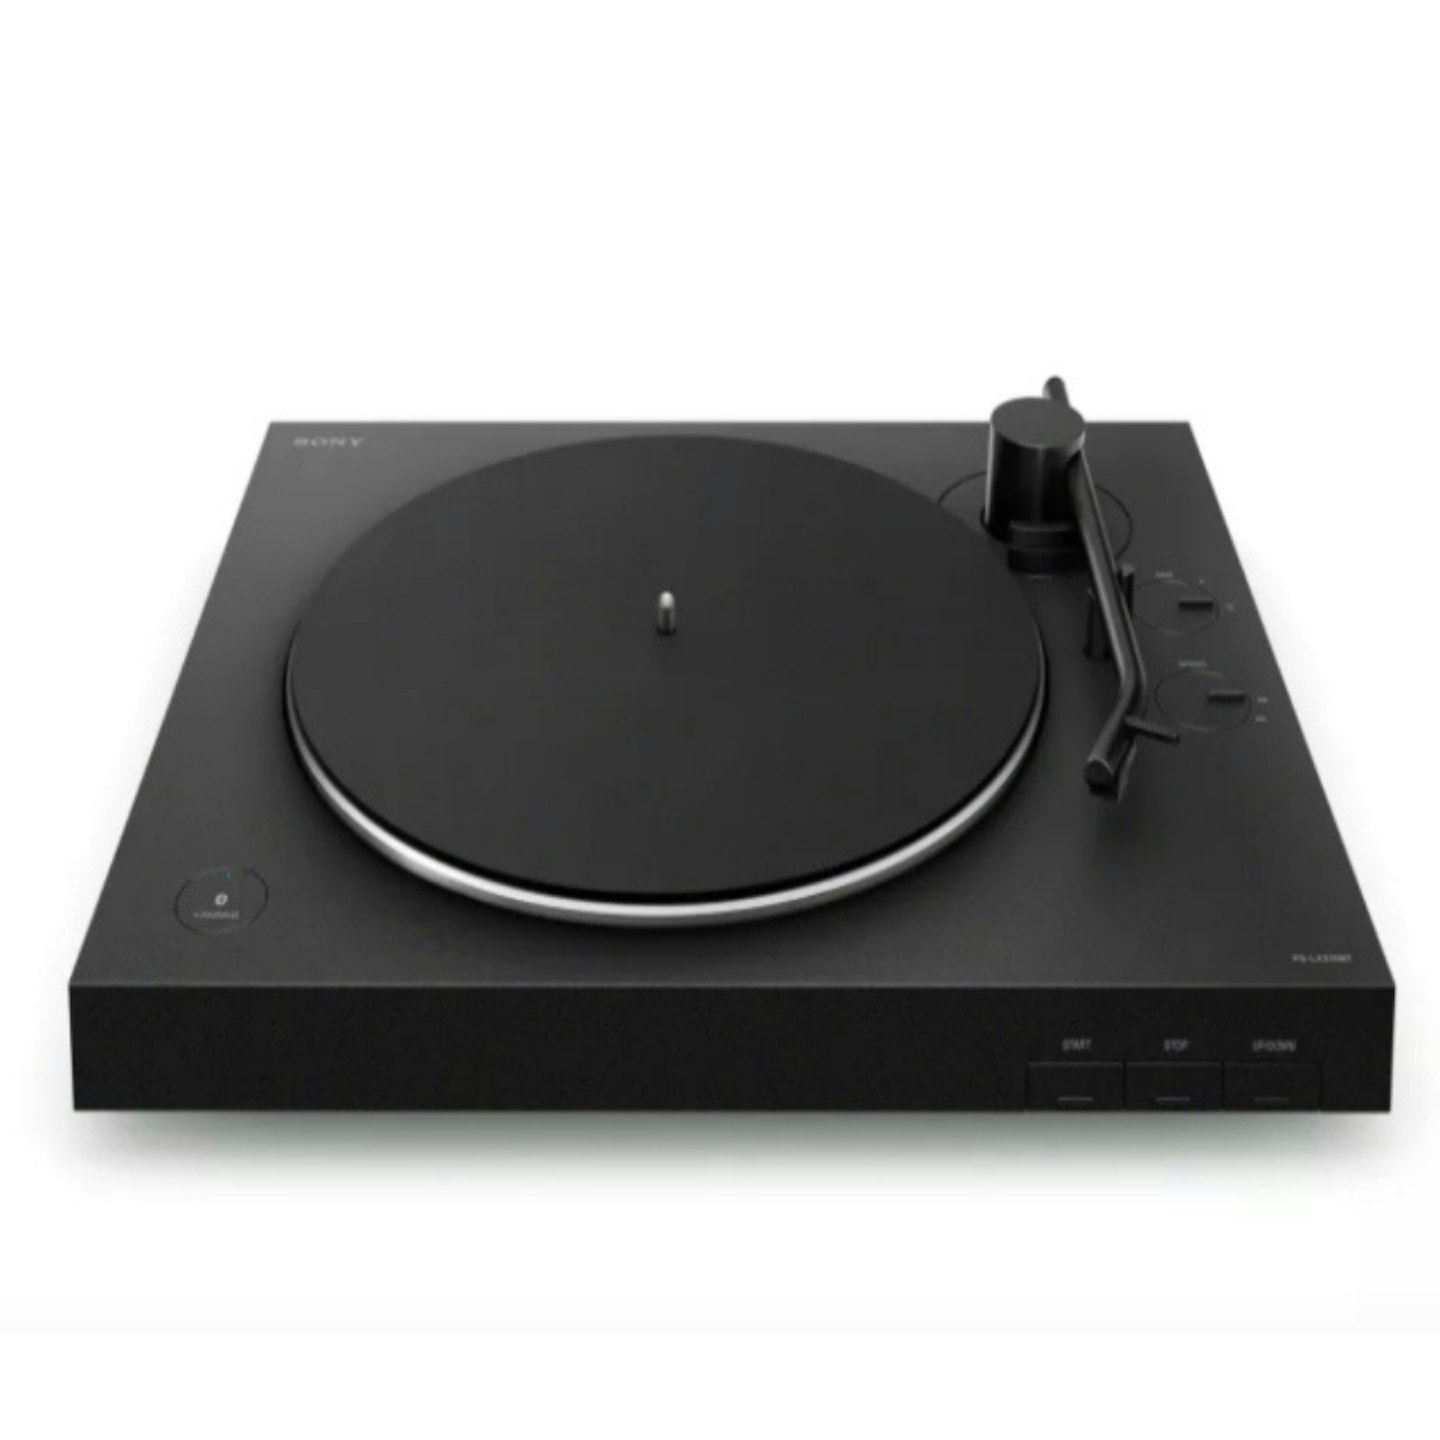 The SONY PS-LX310BT Belt Drive Bluetooth Turntable